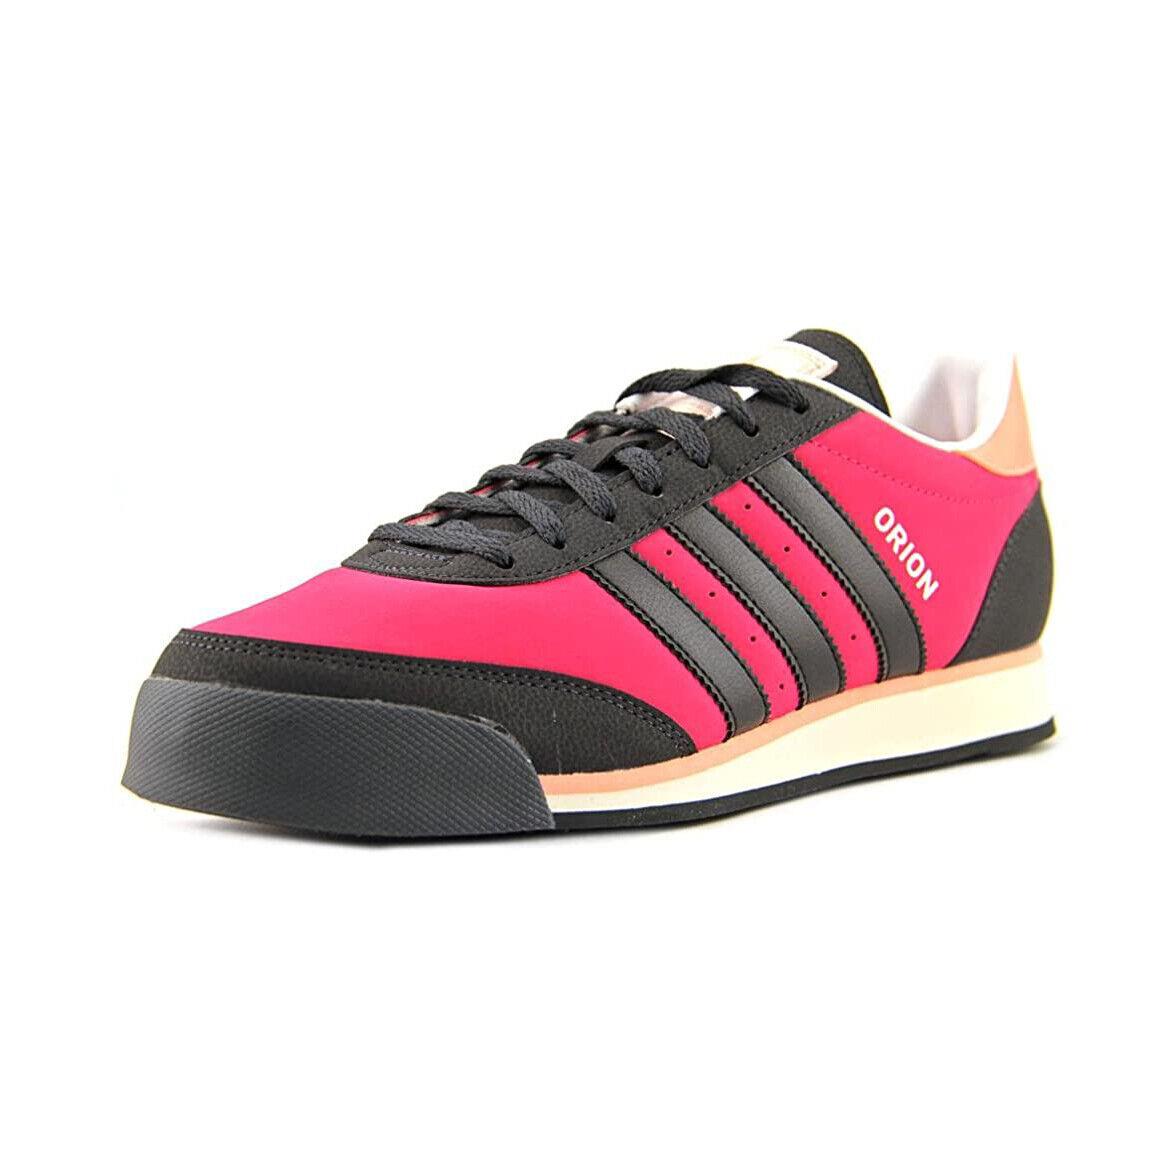 Adidas Orion 2 Women Shoes Sneakers G98054 - Black/Pink/White